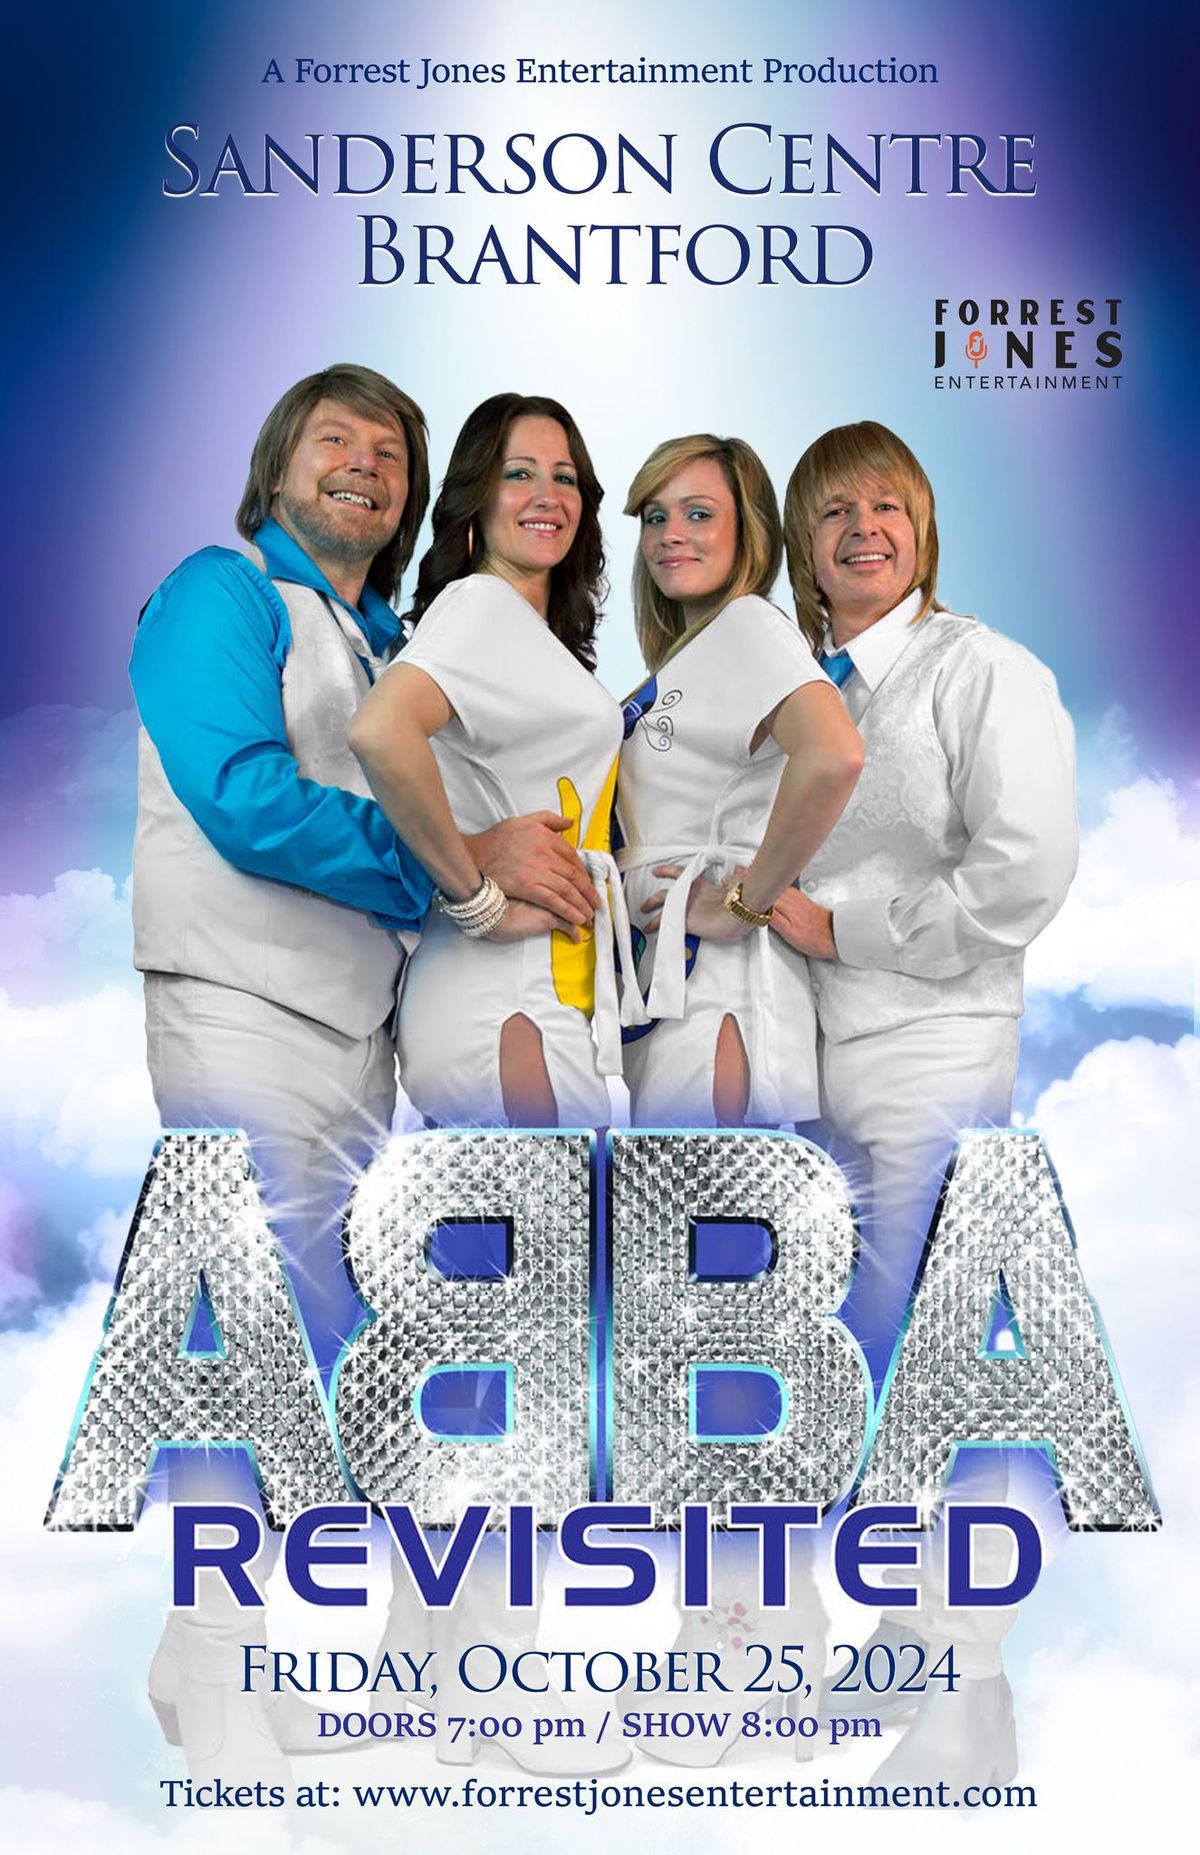 ABBA-REVISITED ... THE CONCERT  FRIDAY OCTOBER 25, 2024 - SANDERSON CENTRE, BRANTFORD